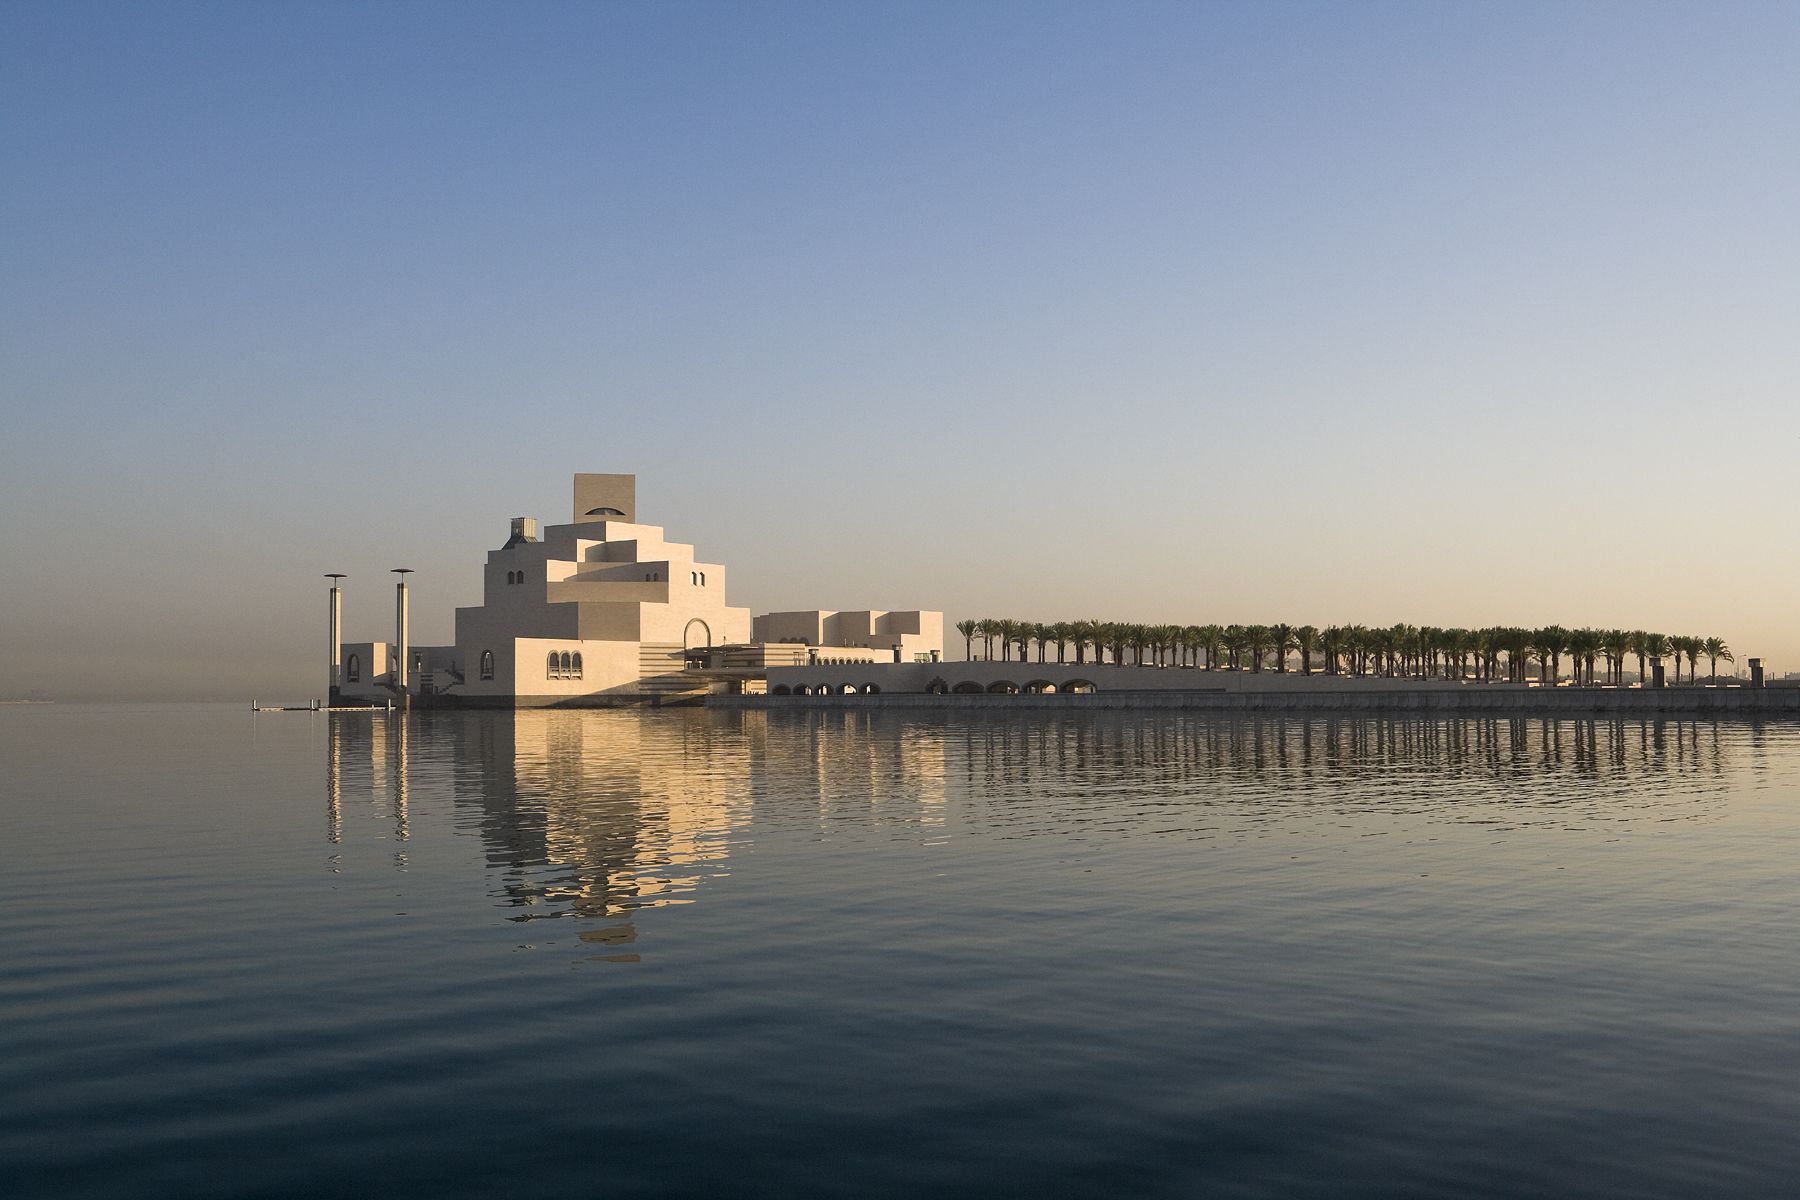 The iconic angular white stone building of the Museum of Islamic art, seen from across the water from a distance.